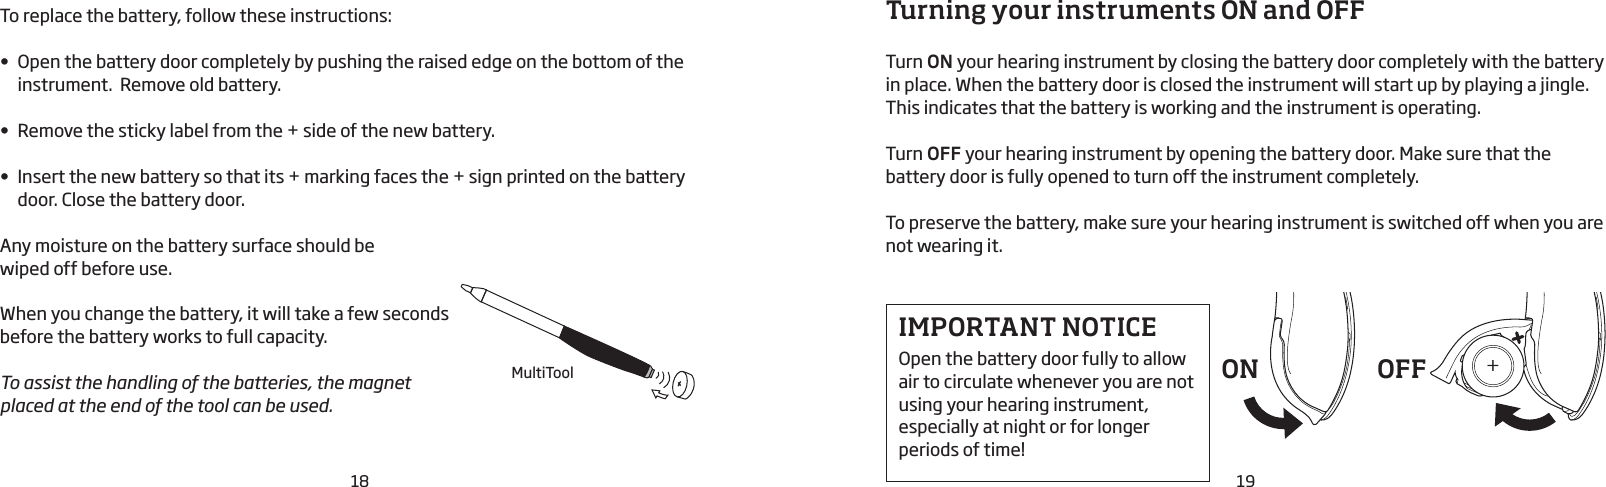 19Turning your instruments ON and OFFTurn ON your hearing instrument by closing the battery door completely with the battery in place. When the battery door is closed the instrument will start up by playing a jingle. This indicates that the battery is working and the instrument is operating.Turn OFF your hearing instrument by opening the battery door. Make sure that the battery door is fully opened to turn off the instrument completely.To preserve the battery, make sure your hearing instrument is switched off when you are not wearing it.IMPORTANT NOTICEOpen the battery door fully to allow air to circulate whenever you are not using your hearing instrument, especially at night or for longer periods of time!ON OFFTo replace the battery, follow these instructions:• Open the battery door completely by pushing the raised edge on the bottom of the instrument.  Remove old battery.• Remove the sticky label from the + side of the new battery.• Insert the new battery so that its + marking faces the + sign printed on the battery door. Close the battery door.Any moisture on the battery surface should be  wiped off before use.When you change the battery, it will take a few seconds before the battery works to full capacity. To assist the handling of the batteries, the magnet placed at the end of the tool can be used.18MultiTool++